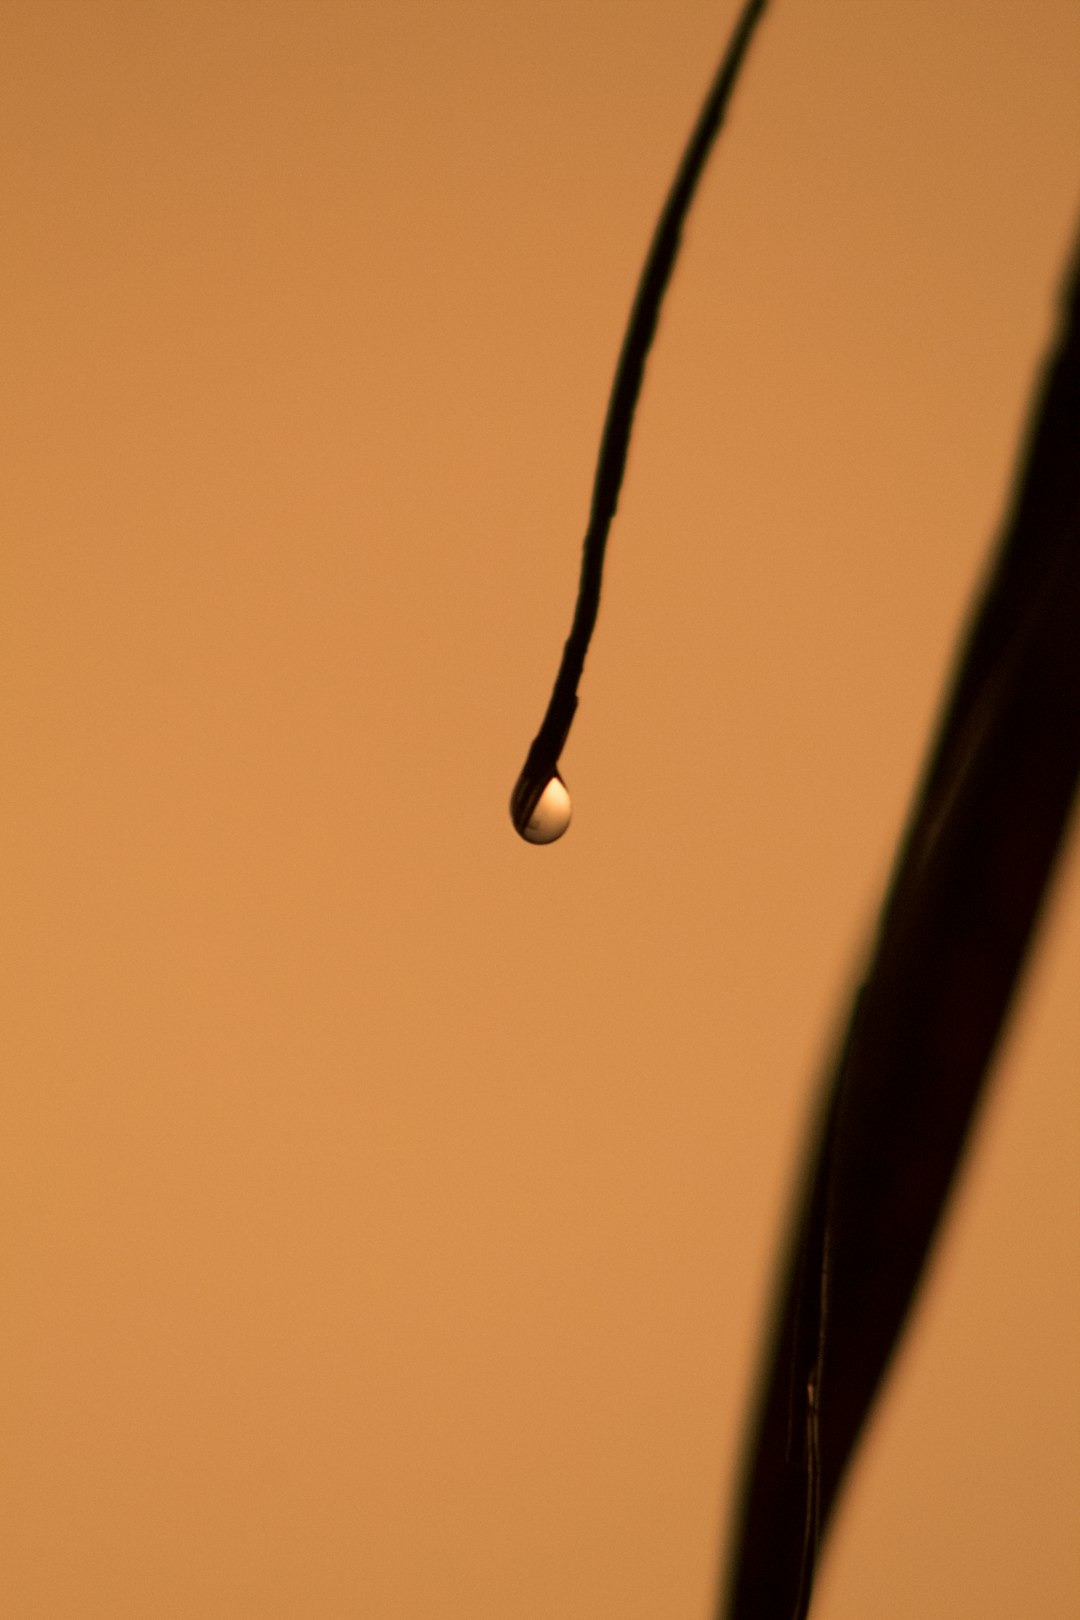 water dew on black coated wire